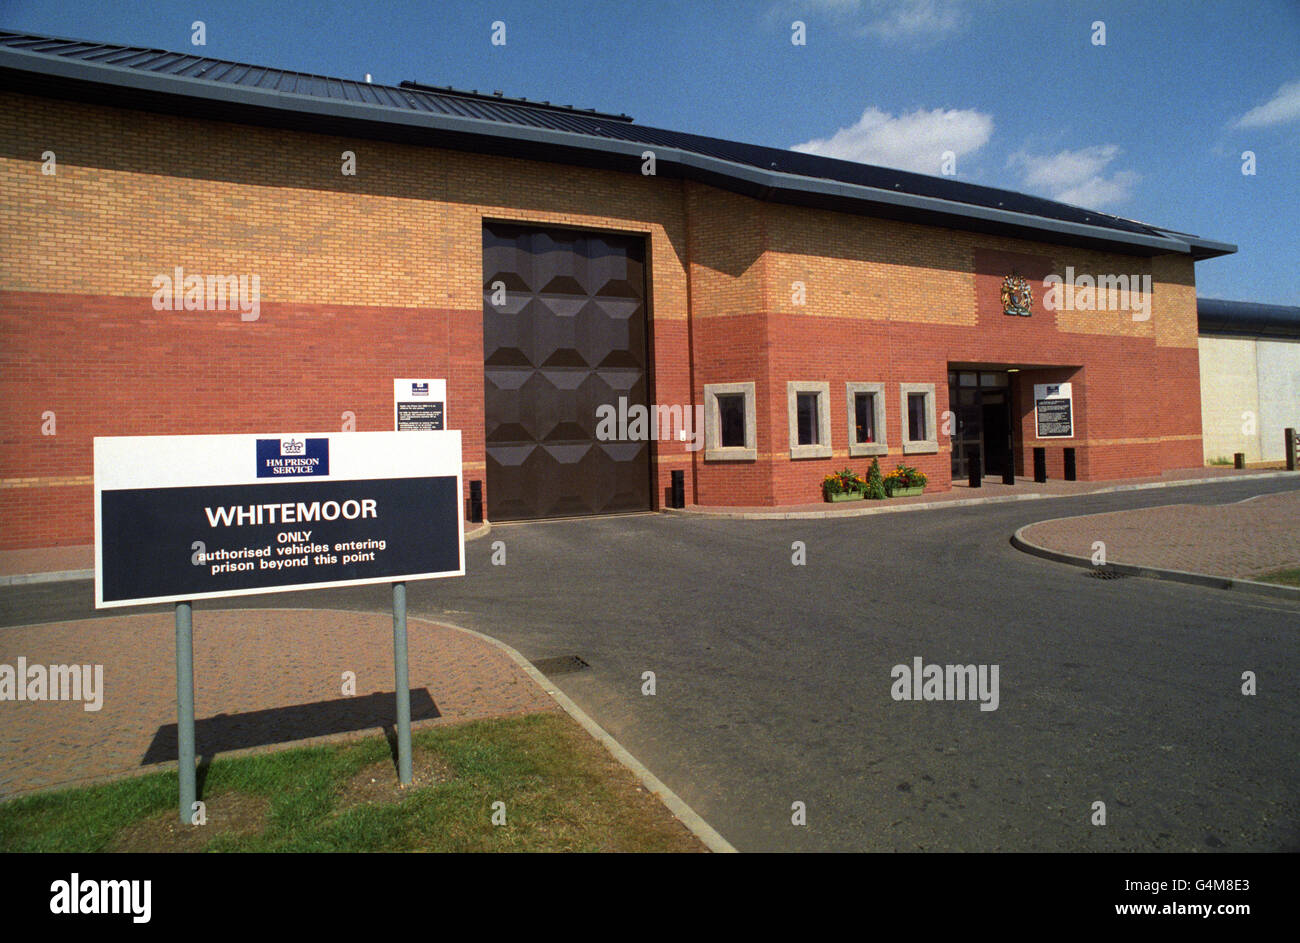 Whitemoor Prison, Cambs. 01/05/99 The Prison Service was forced to change all the cell locks at high security Whitemoor jail, after a duplicate key was found in the cell of an inmate nicknamed 'The Locksmith'. Stock Photo